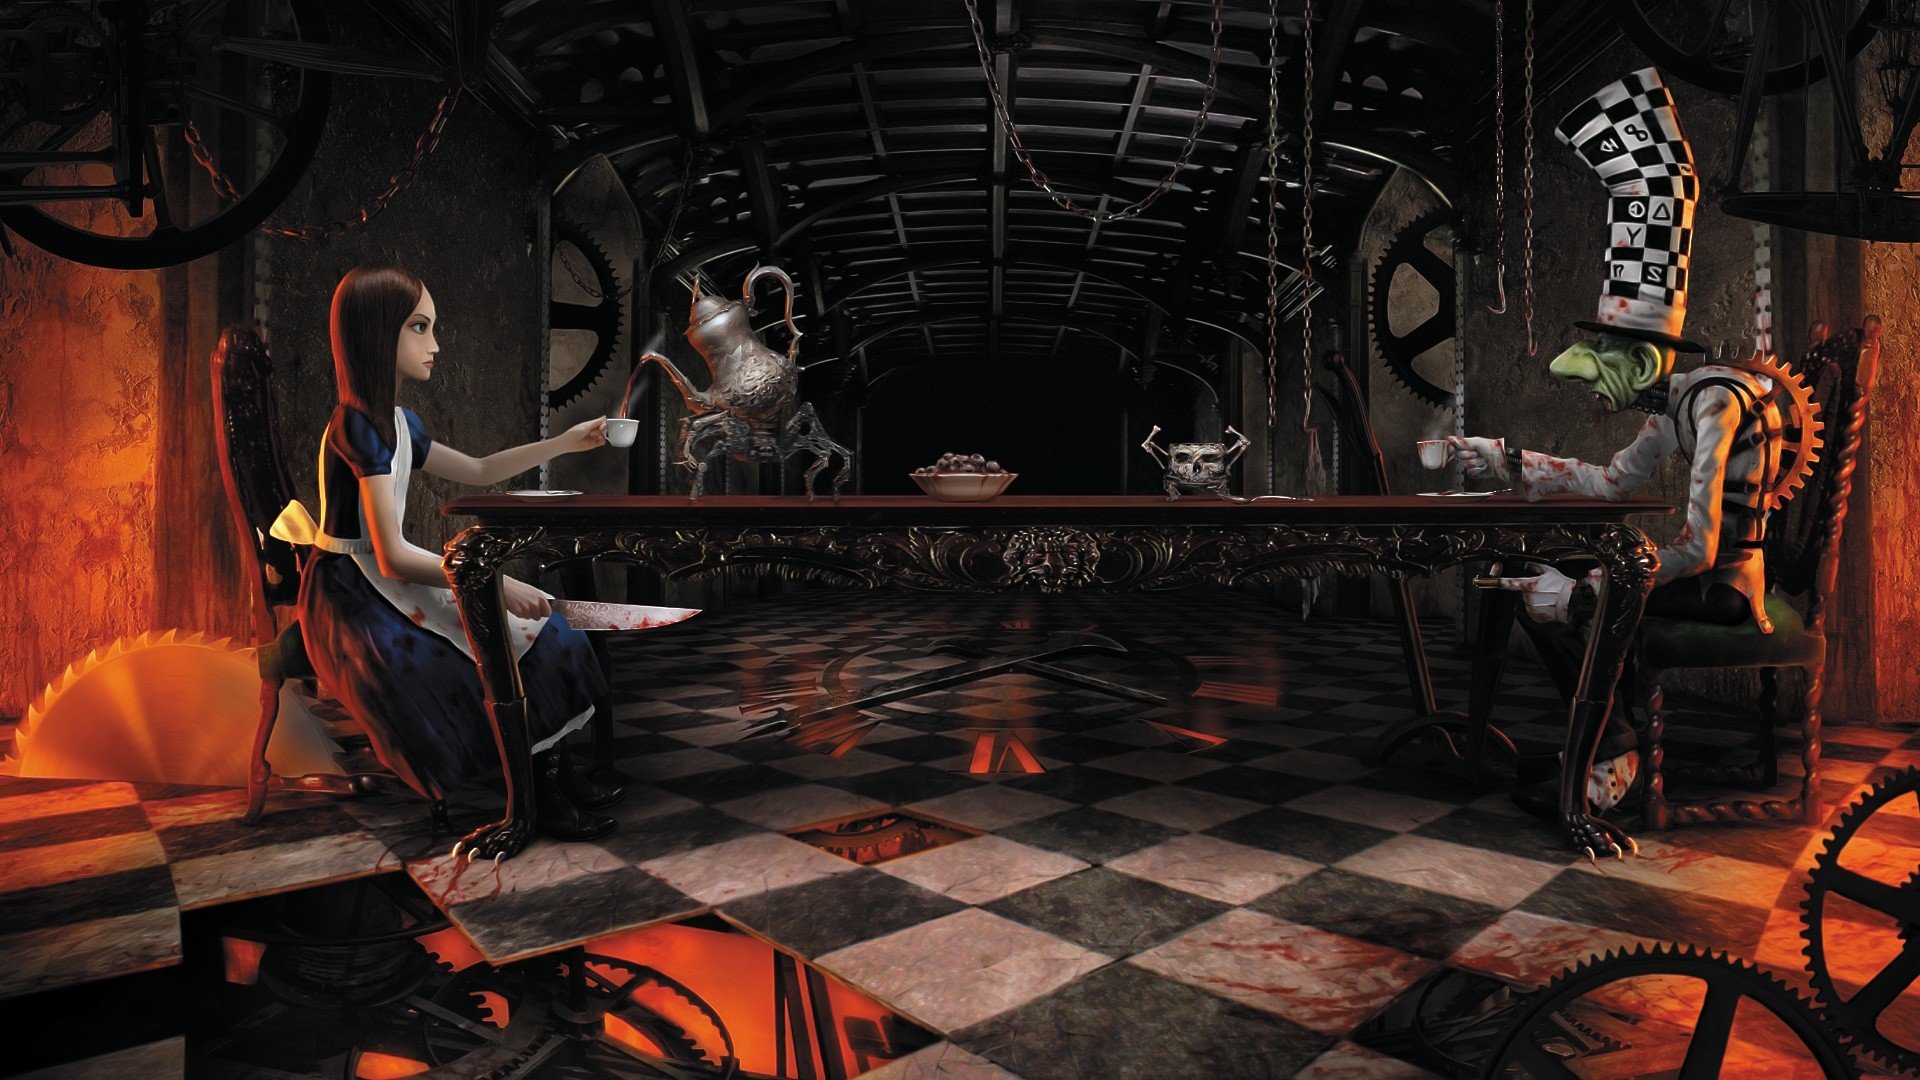 video, Games, Mad, Hatter, Artwork, American, Mcgees, Alice Wallpaper